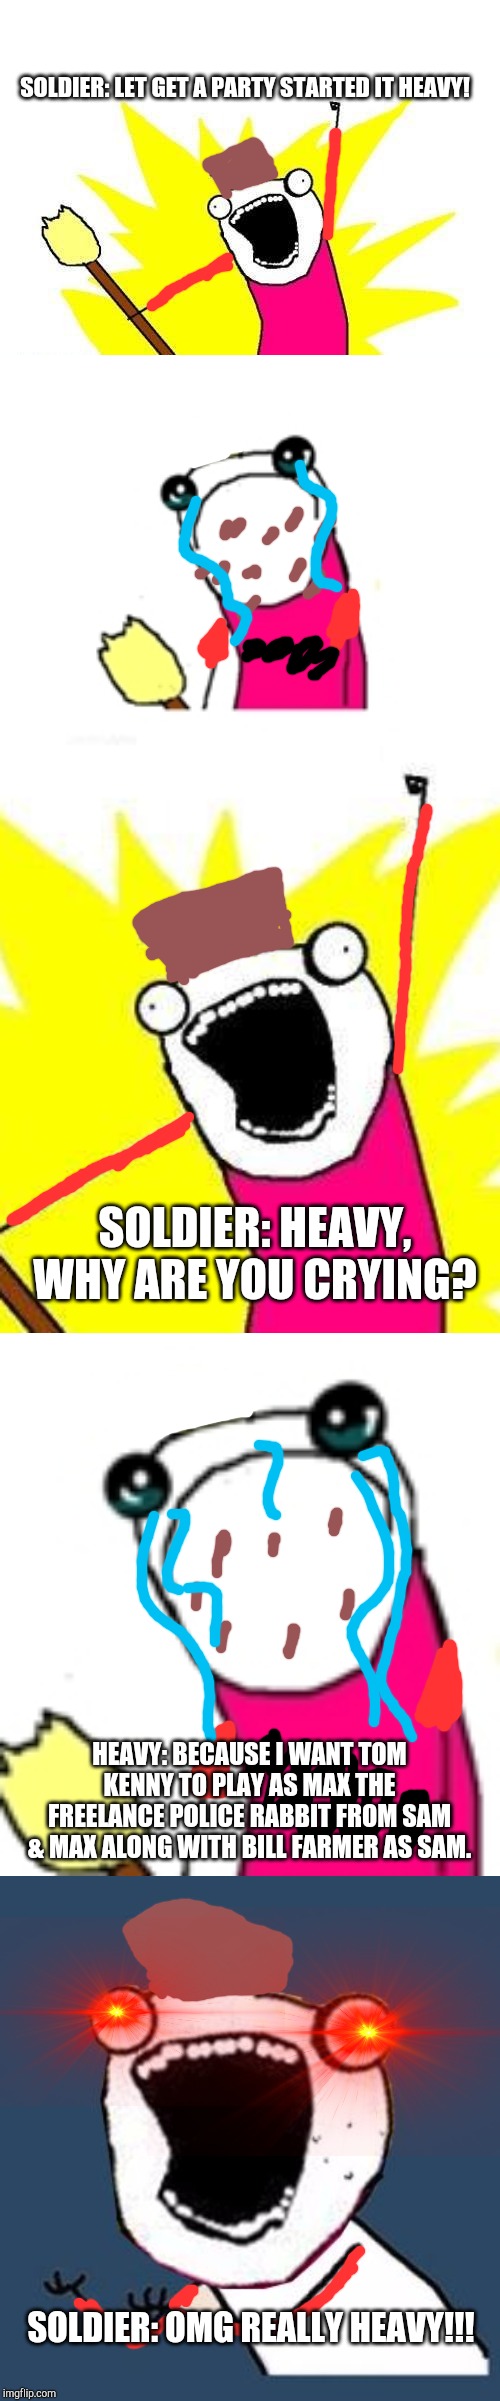 Heavy want to have Tom Kenny in Sam & Max |  SOLDIER: LET GET A PARTY STARTED IT HEAVY! SOLDIER: HEAVY, WHY ARE YOU CRYING? HEAVY: BECAUSE I WANT TOM KENNY TO PLAY AS MAX THE FREELANCE POLICE RABBIT FROM SAM & MAX ALONG WITH BILL FARMER AS SAM. SOLDIER: OMG REALLY HEAVY!!! | image tagged in memes,x all the y,sad x all the y,y u no x all the y,sam and max,voice actors | made w/ Imgflip meme maker